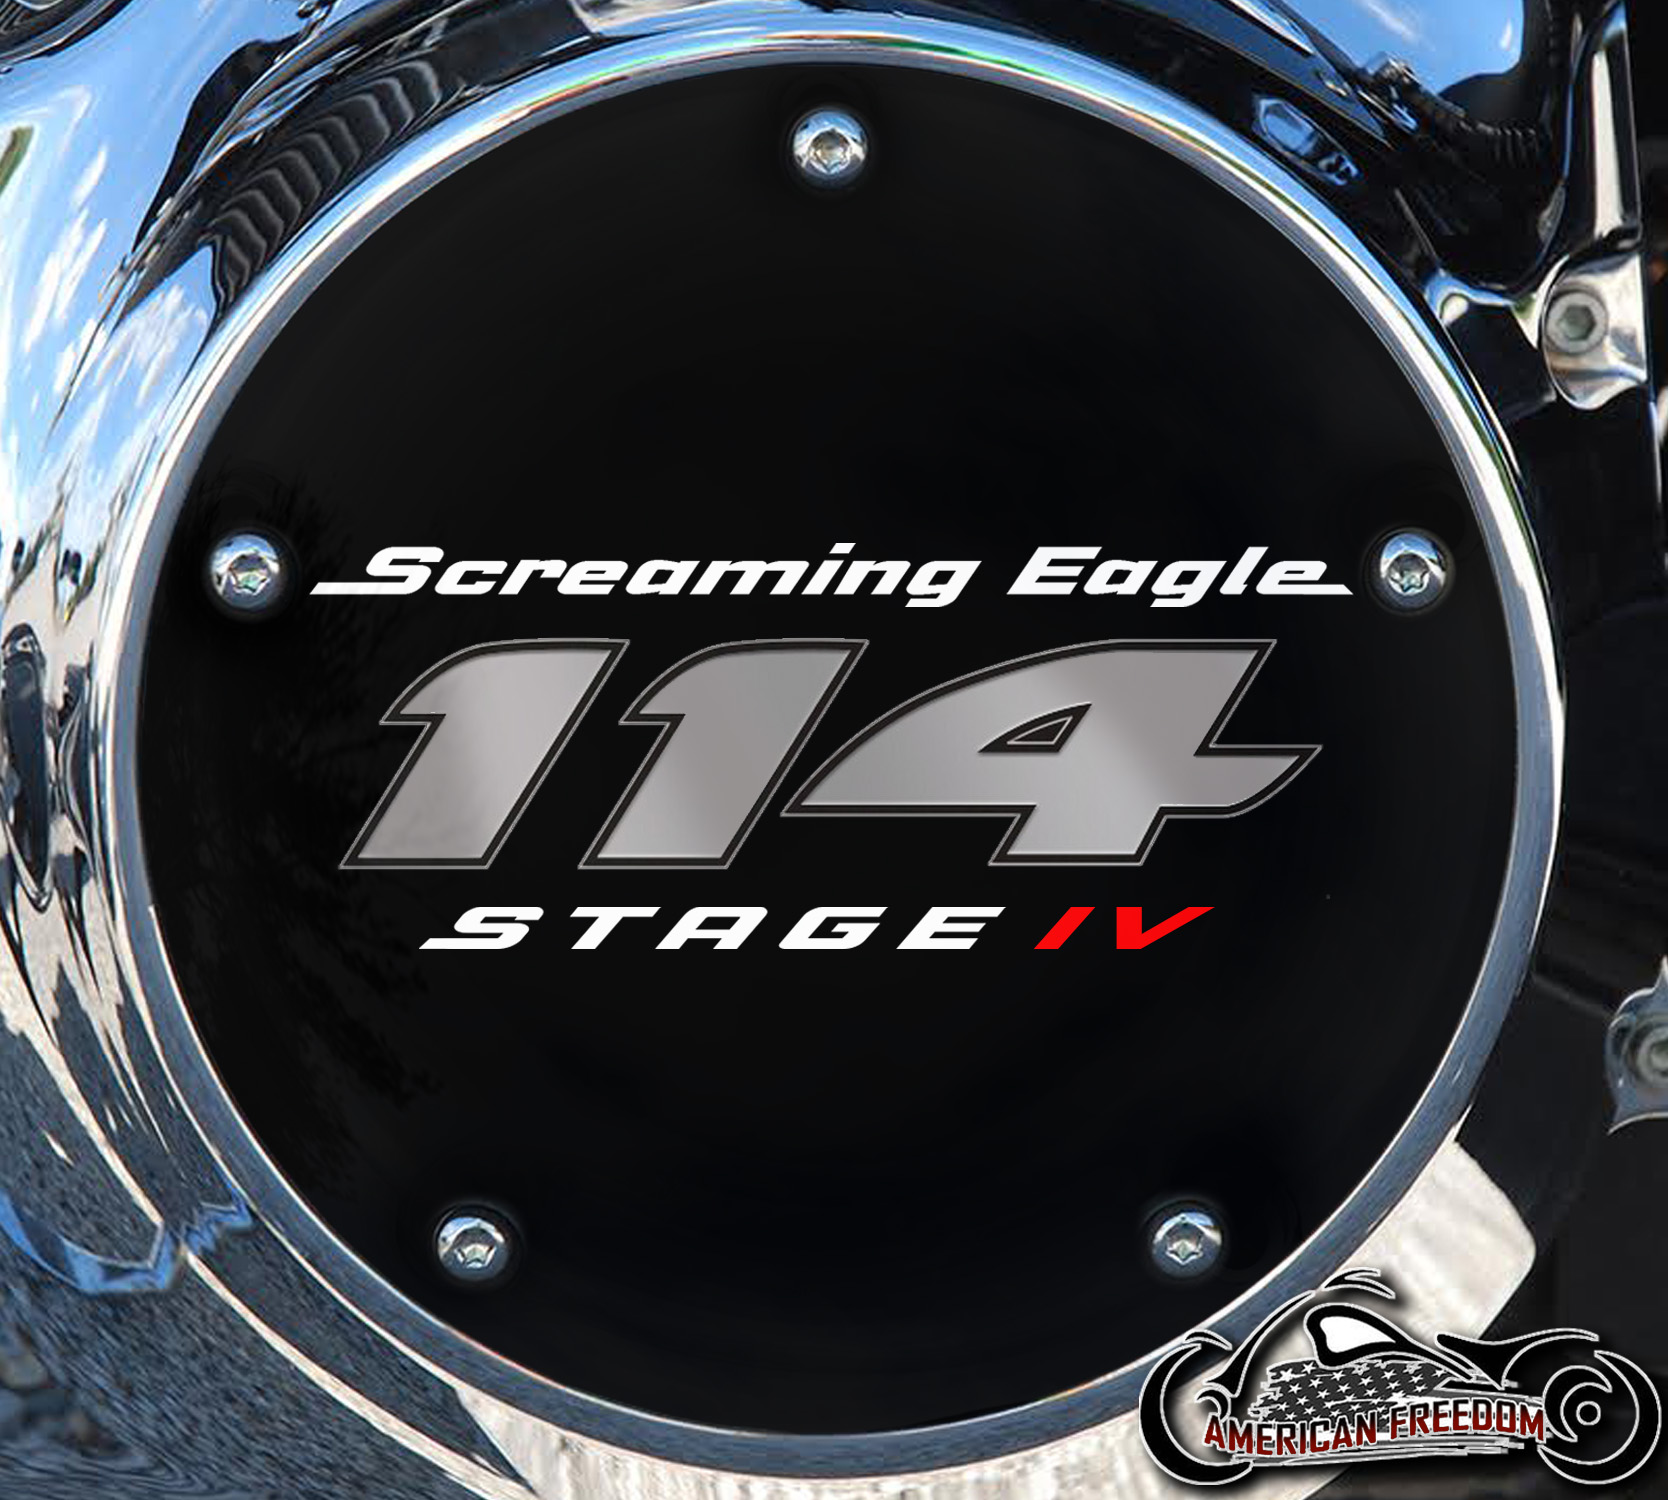 Screaming Eagle Stage IV 114 DERBY COVER